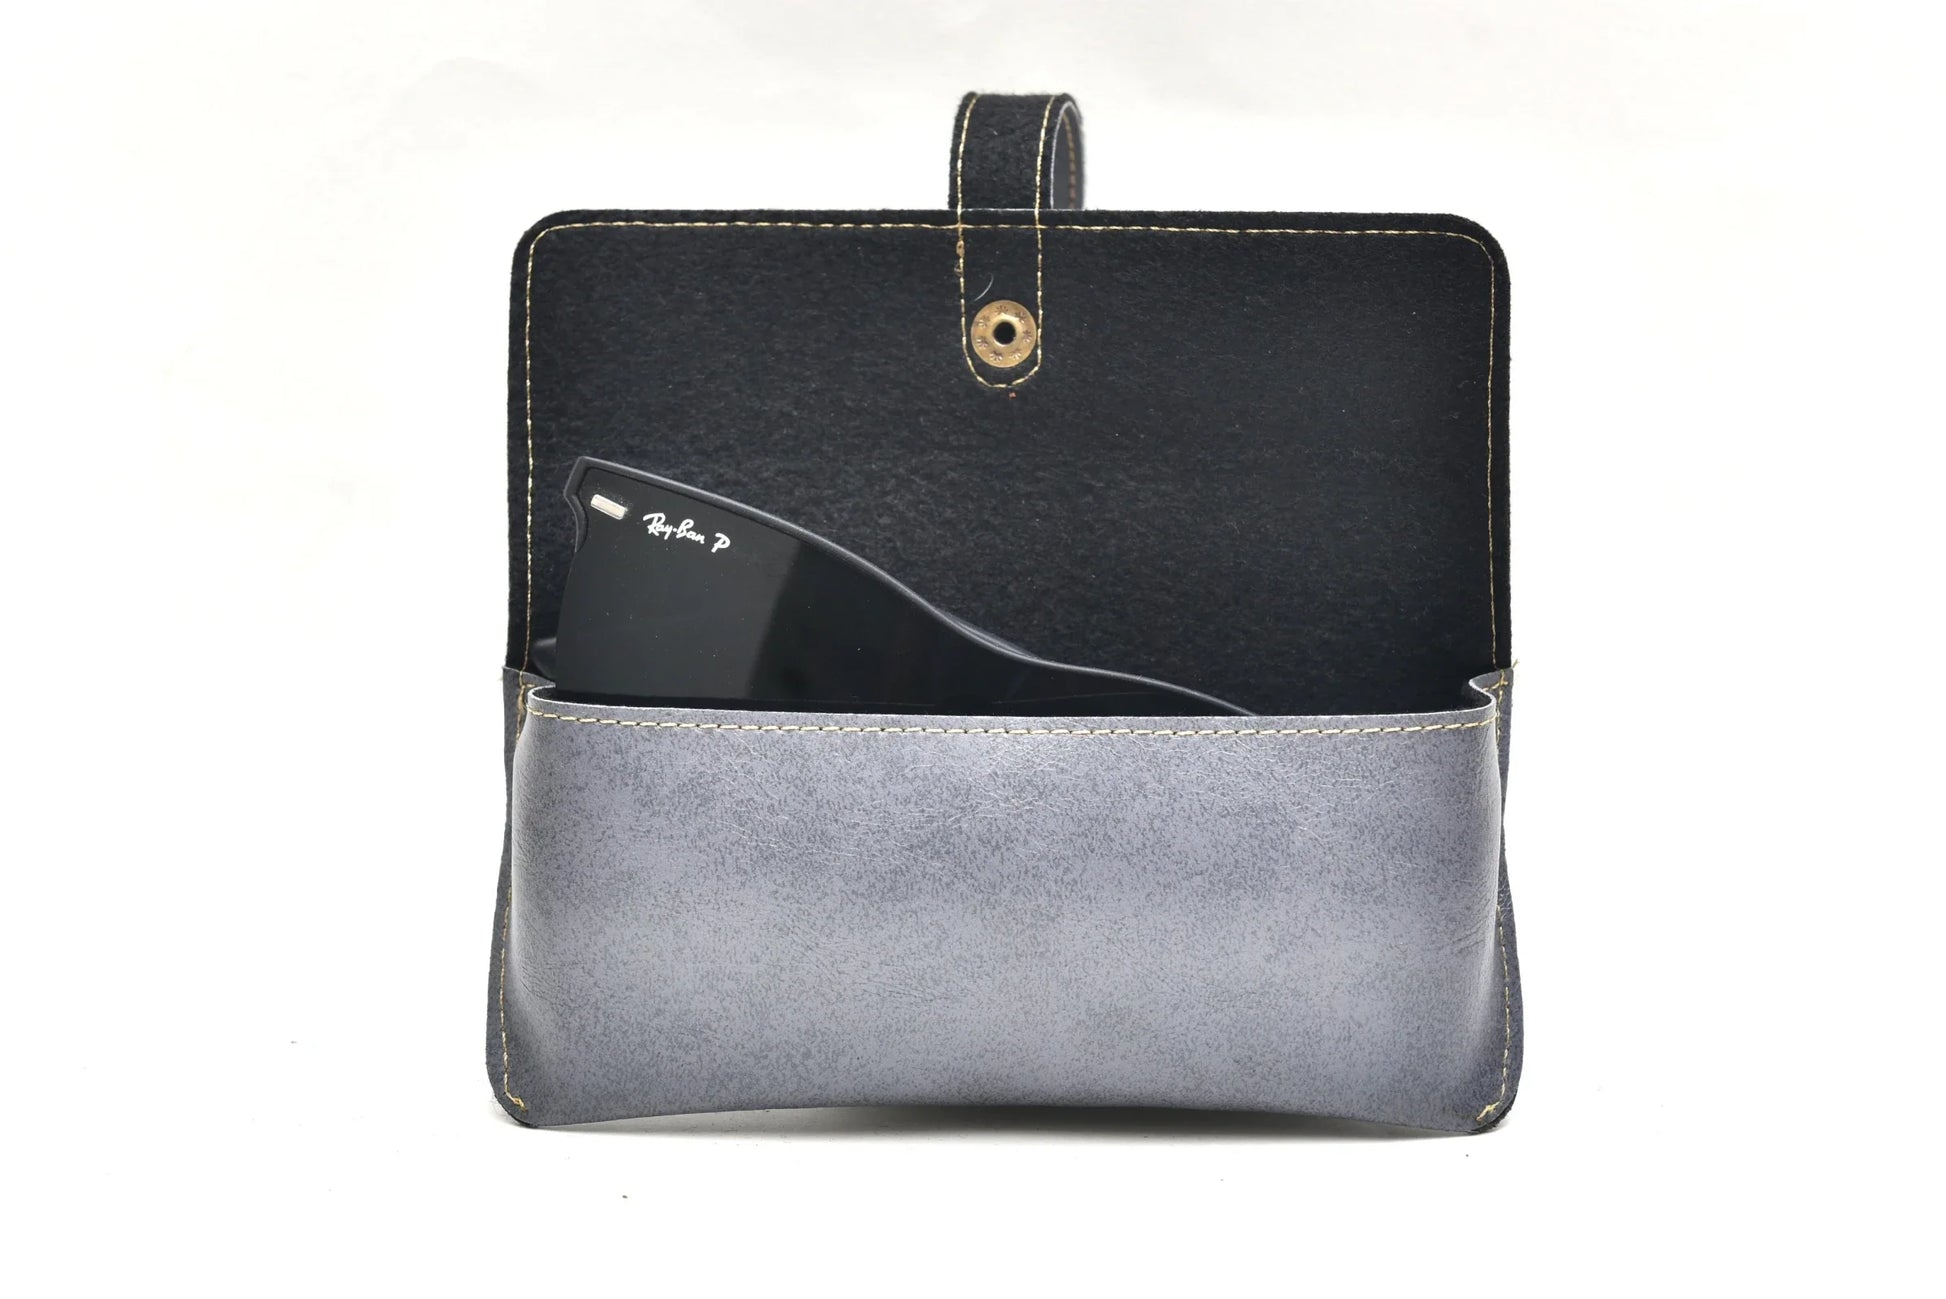 Inside or open view of grey sunglasses case